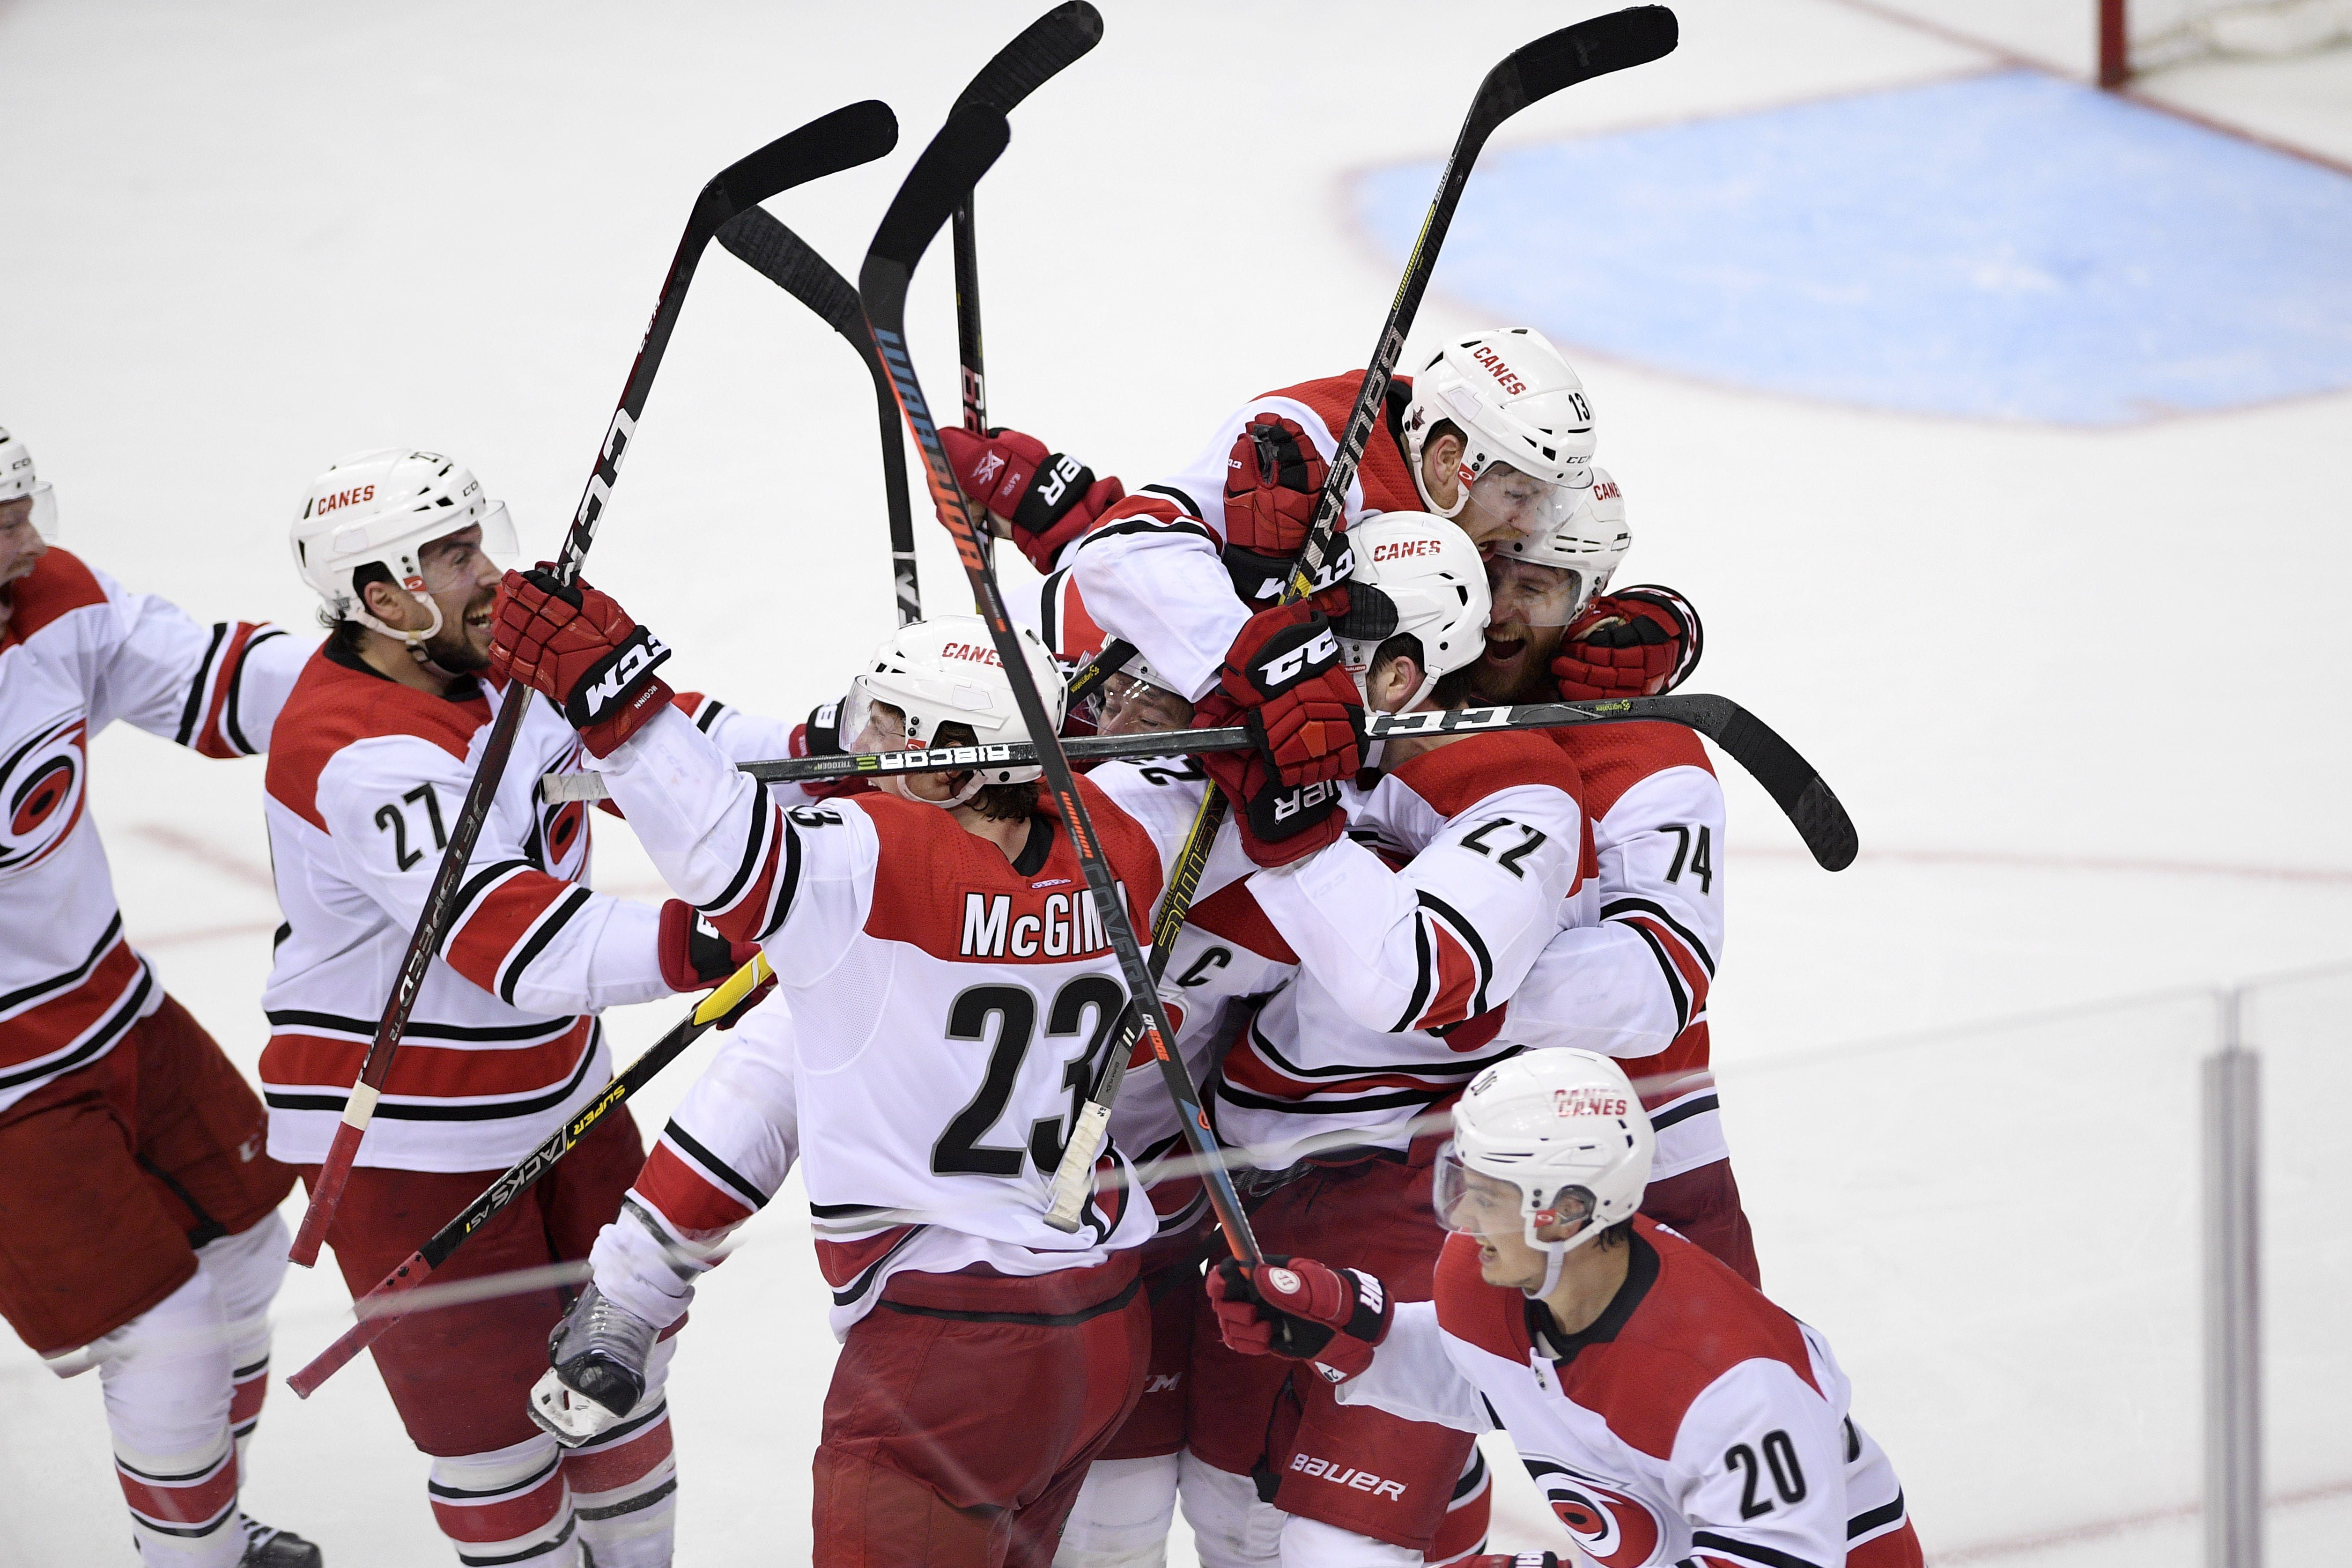 Hurricanes cut series deficit in half with dominant game three, Sports